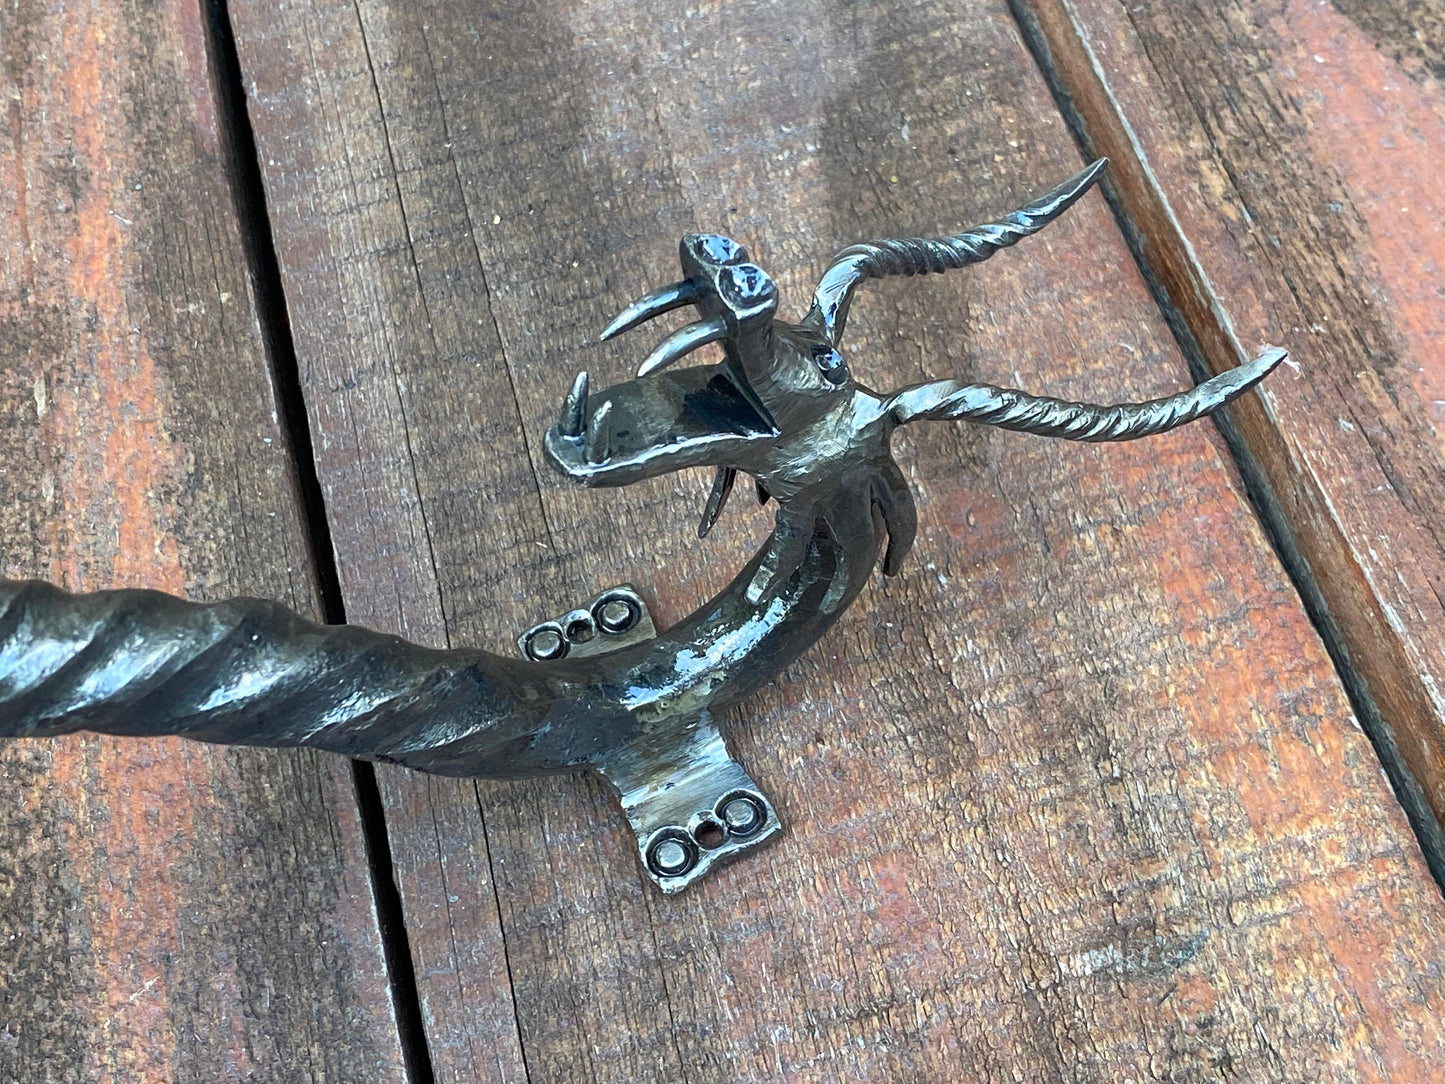 Dragon, door handle, door pull, medieval, viking, renovation, Christmas, birthday, castle, man cave, horn, barn, anniversary, Middle Ages